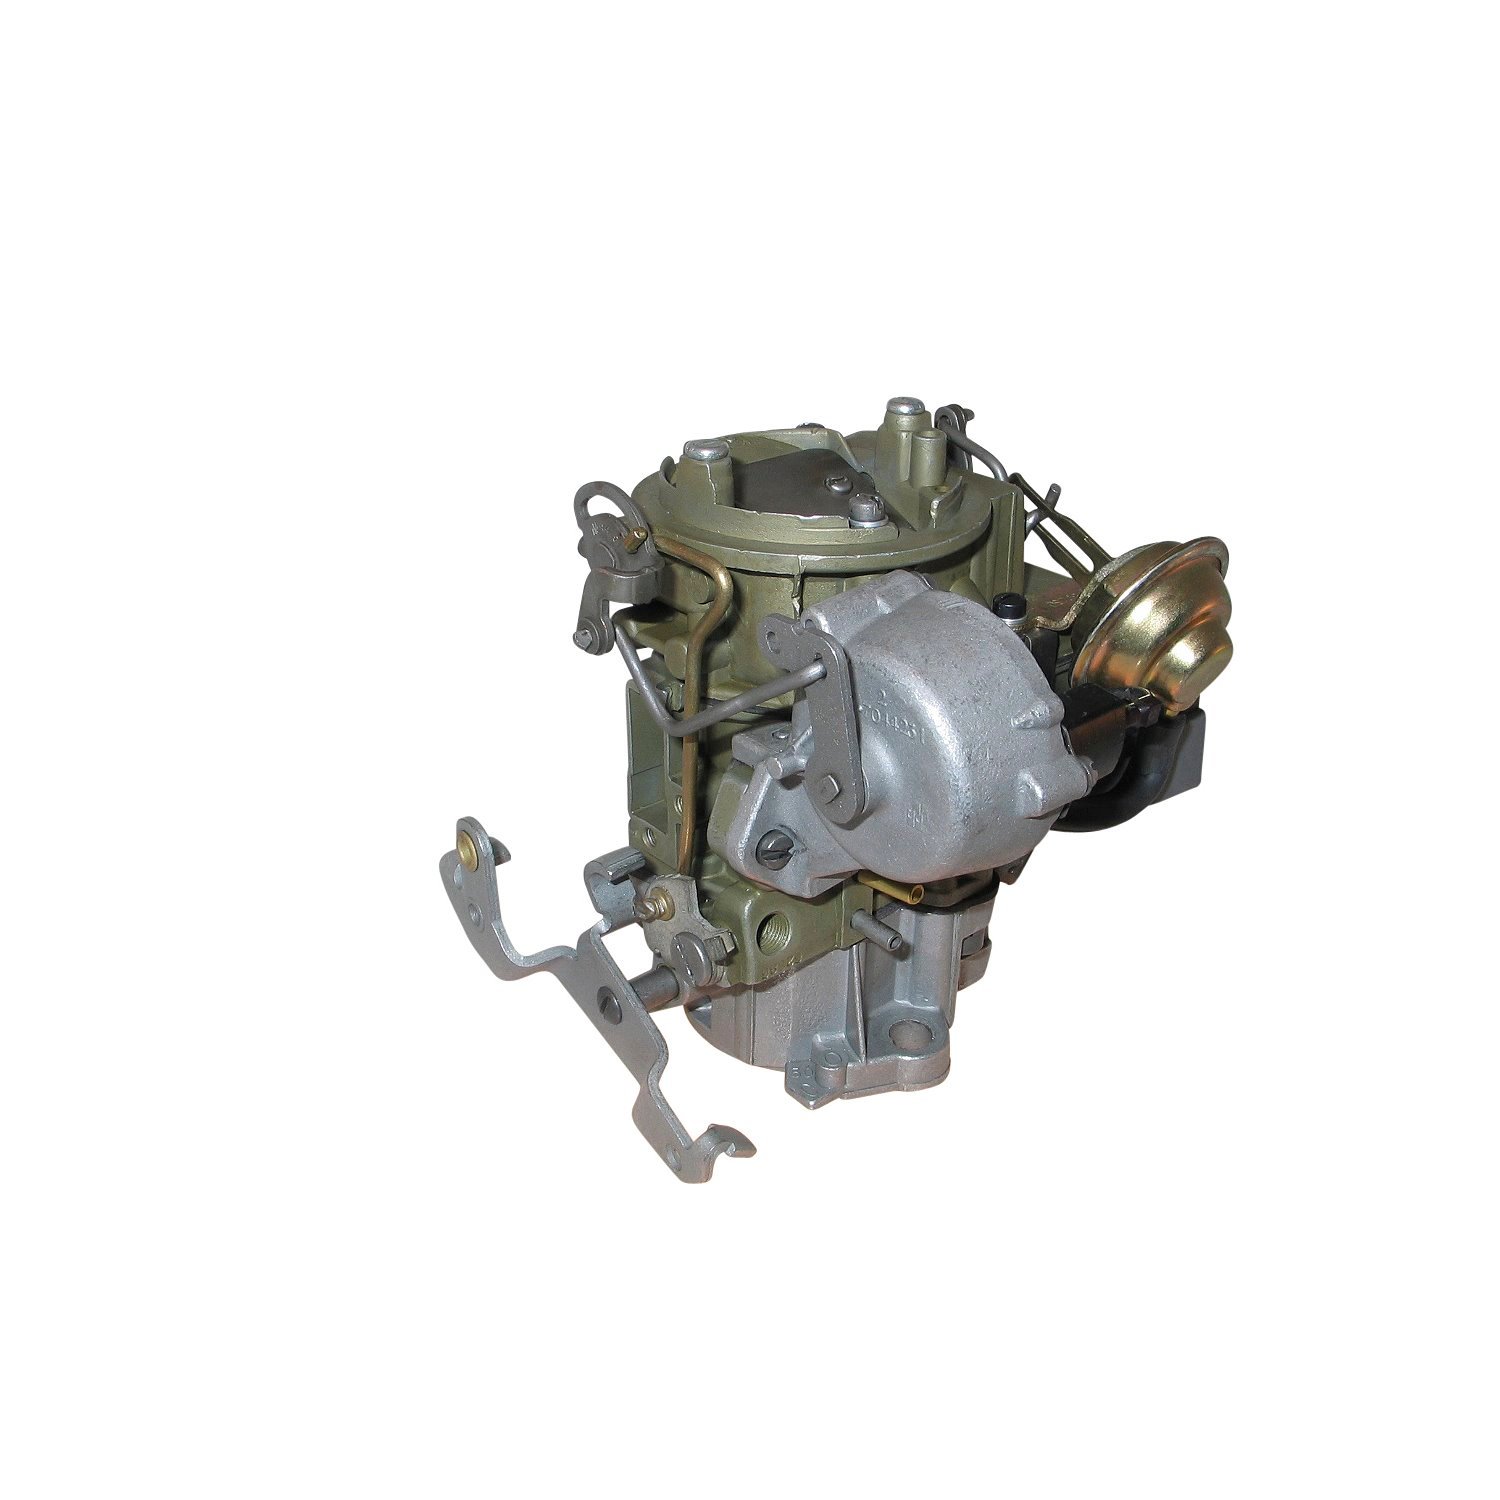 3-3582 Rochester Remanufactured Carburetor, 1ME, Heavy Duty-Style